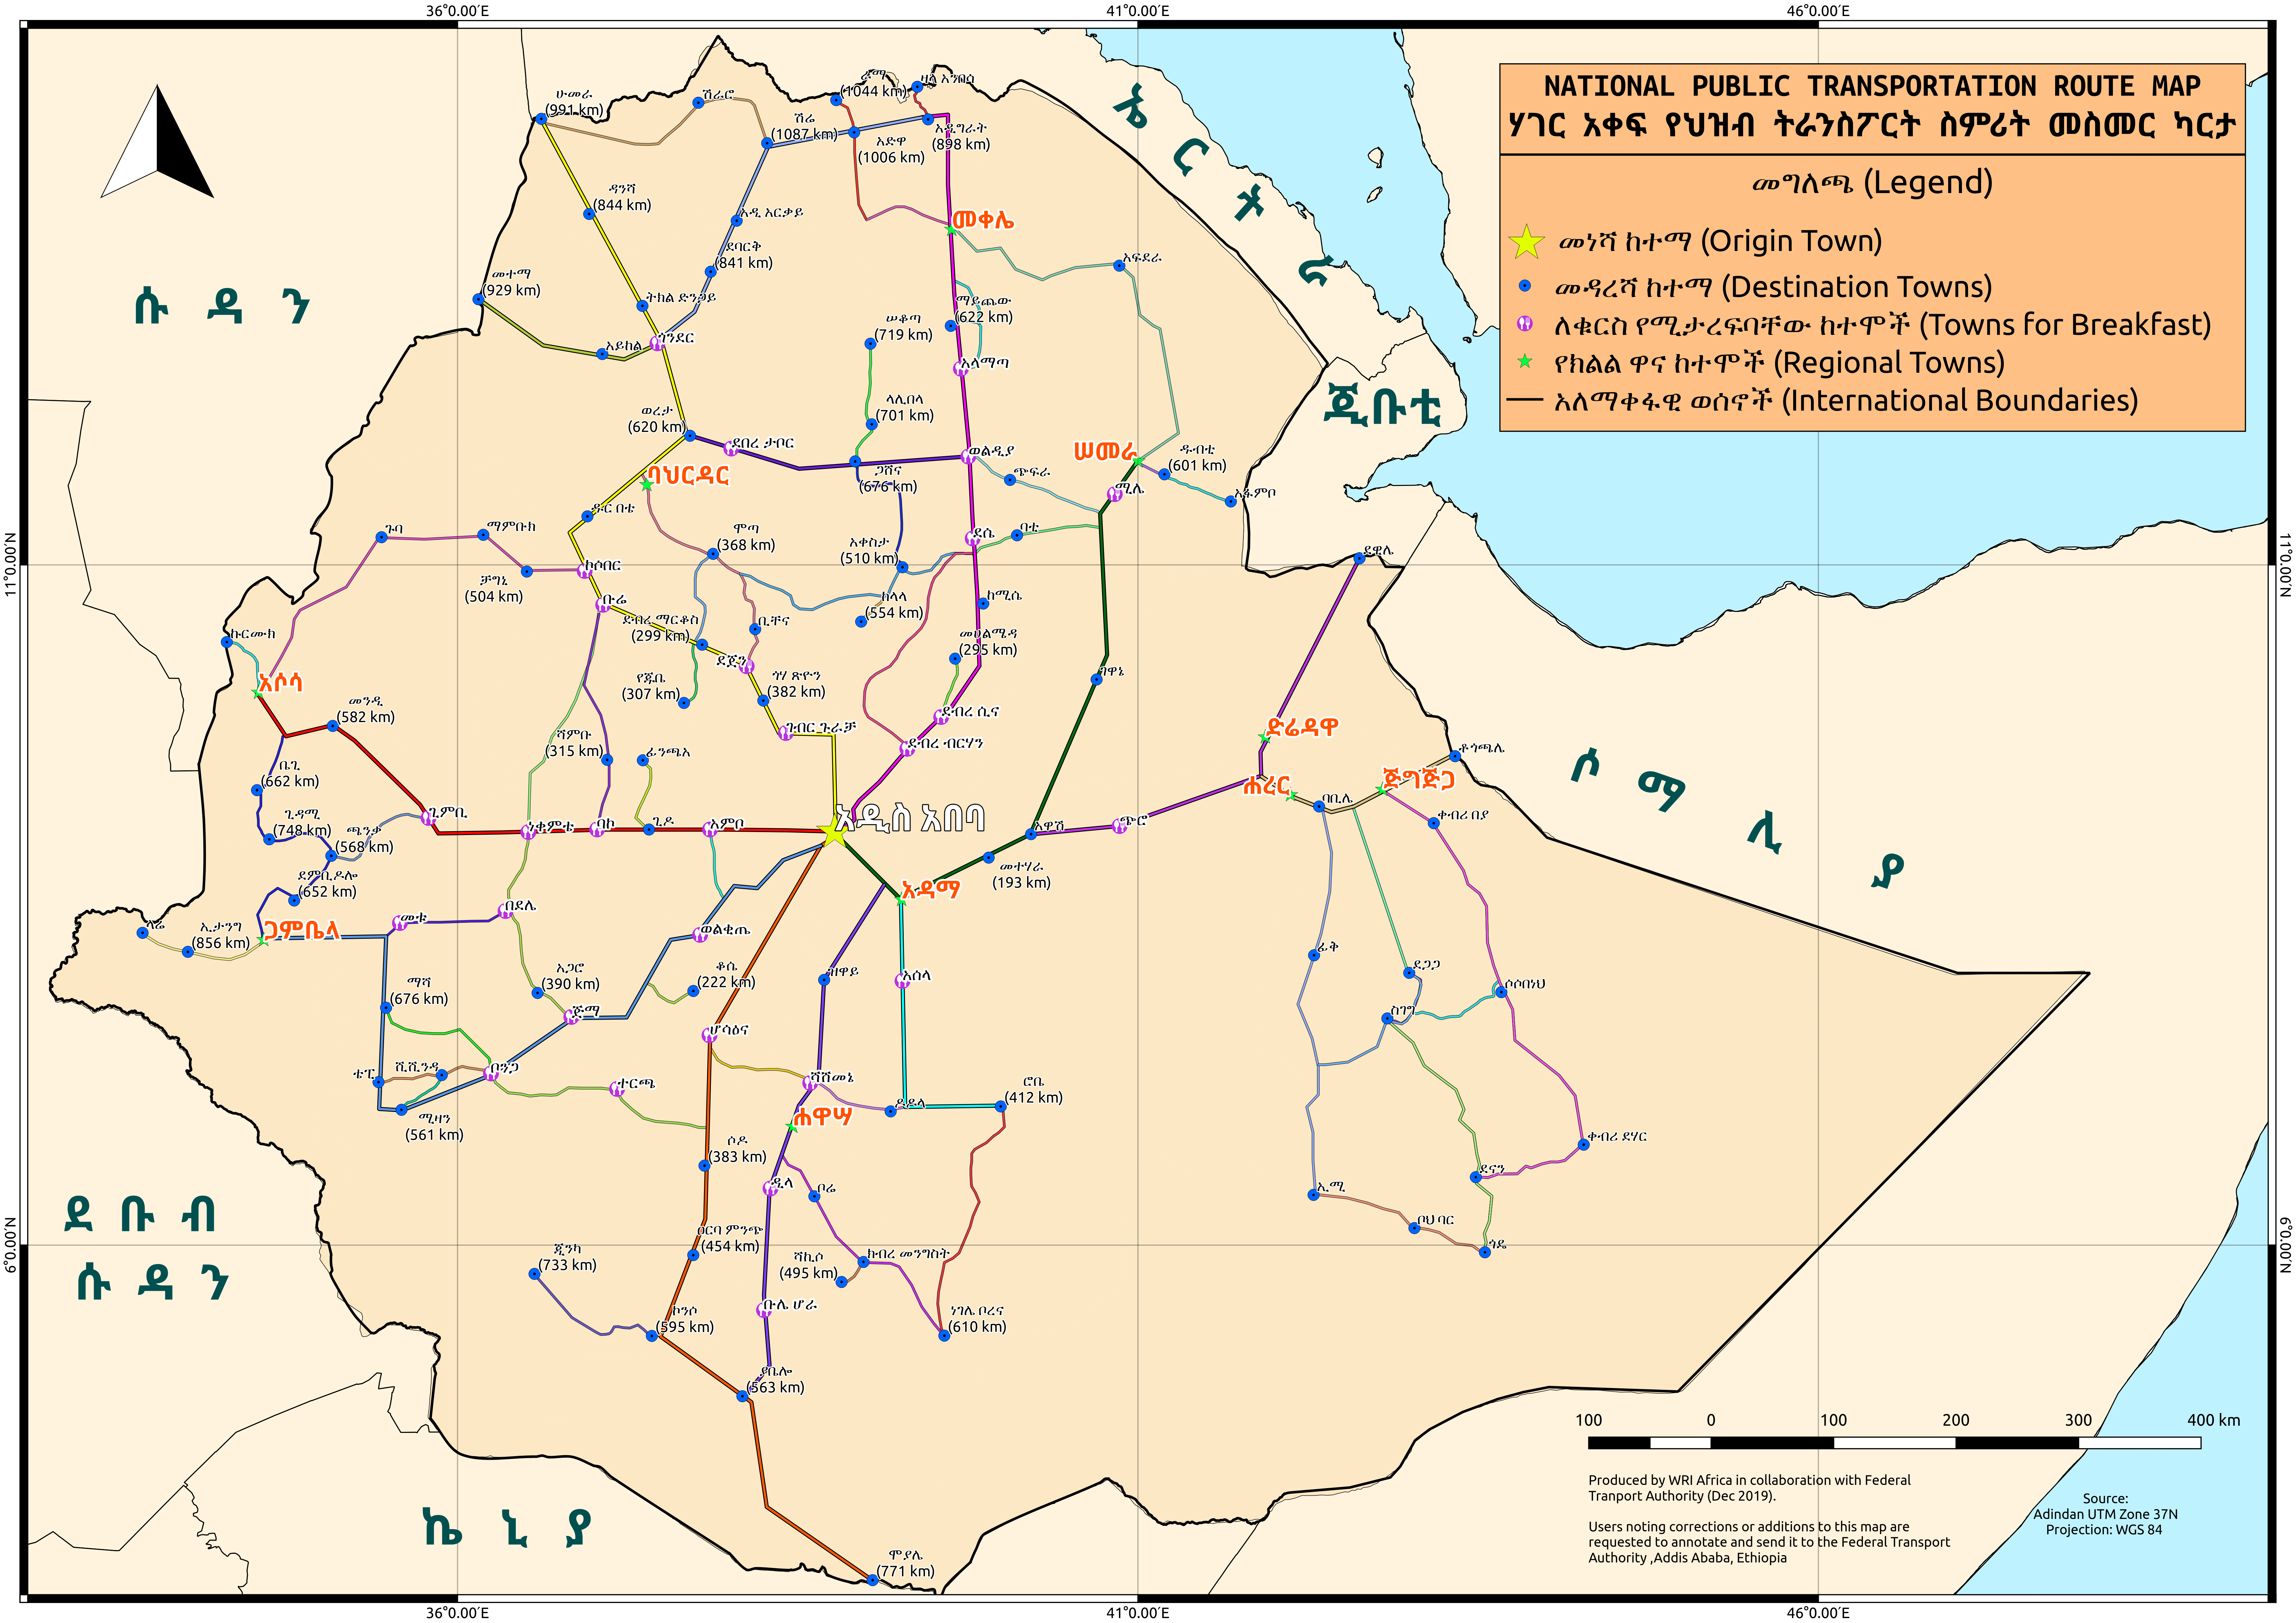 The National Intercity Public Route Network Map of Ethiopia